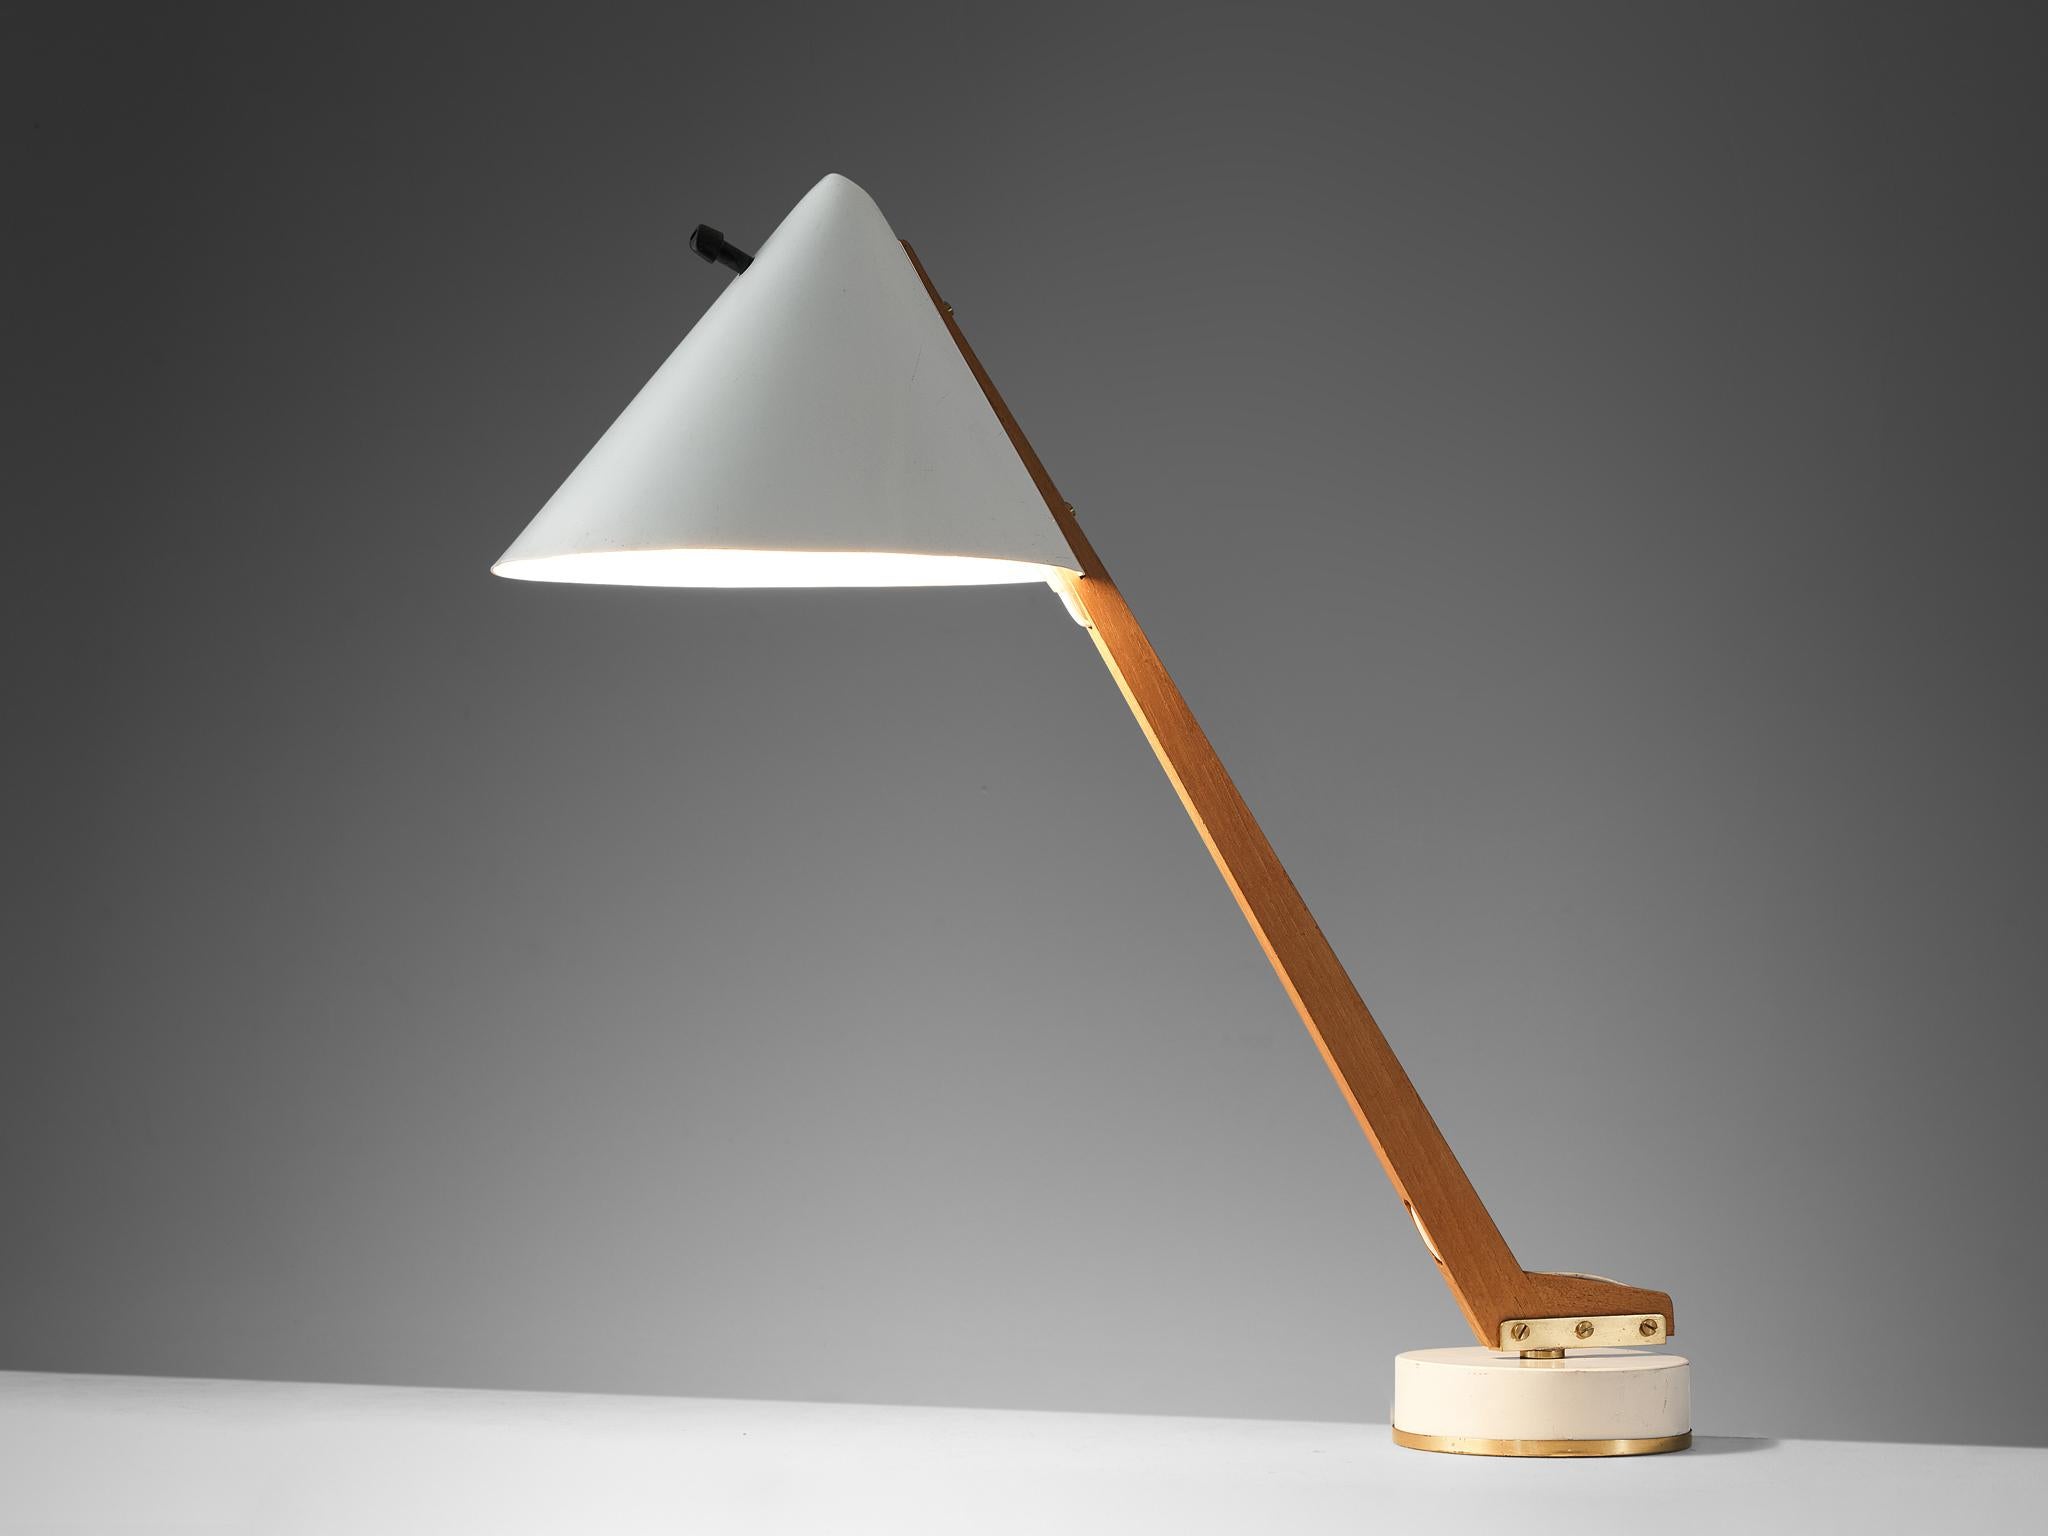 Hans-Agne Jakobsson, produced in Markaryd, table lamp 'model B54', aluminum, brass and teak, Sweden, circa 1955

Desk light designed by the Swedish designer Hans-Agne Jakobsson. The light features a teak, tapered and slanted base, which rests on a